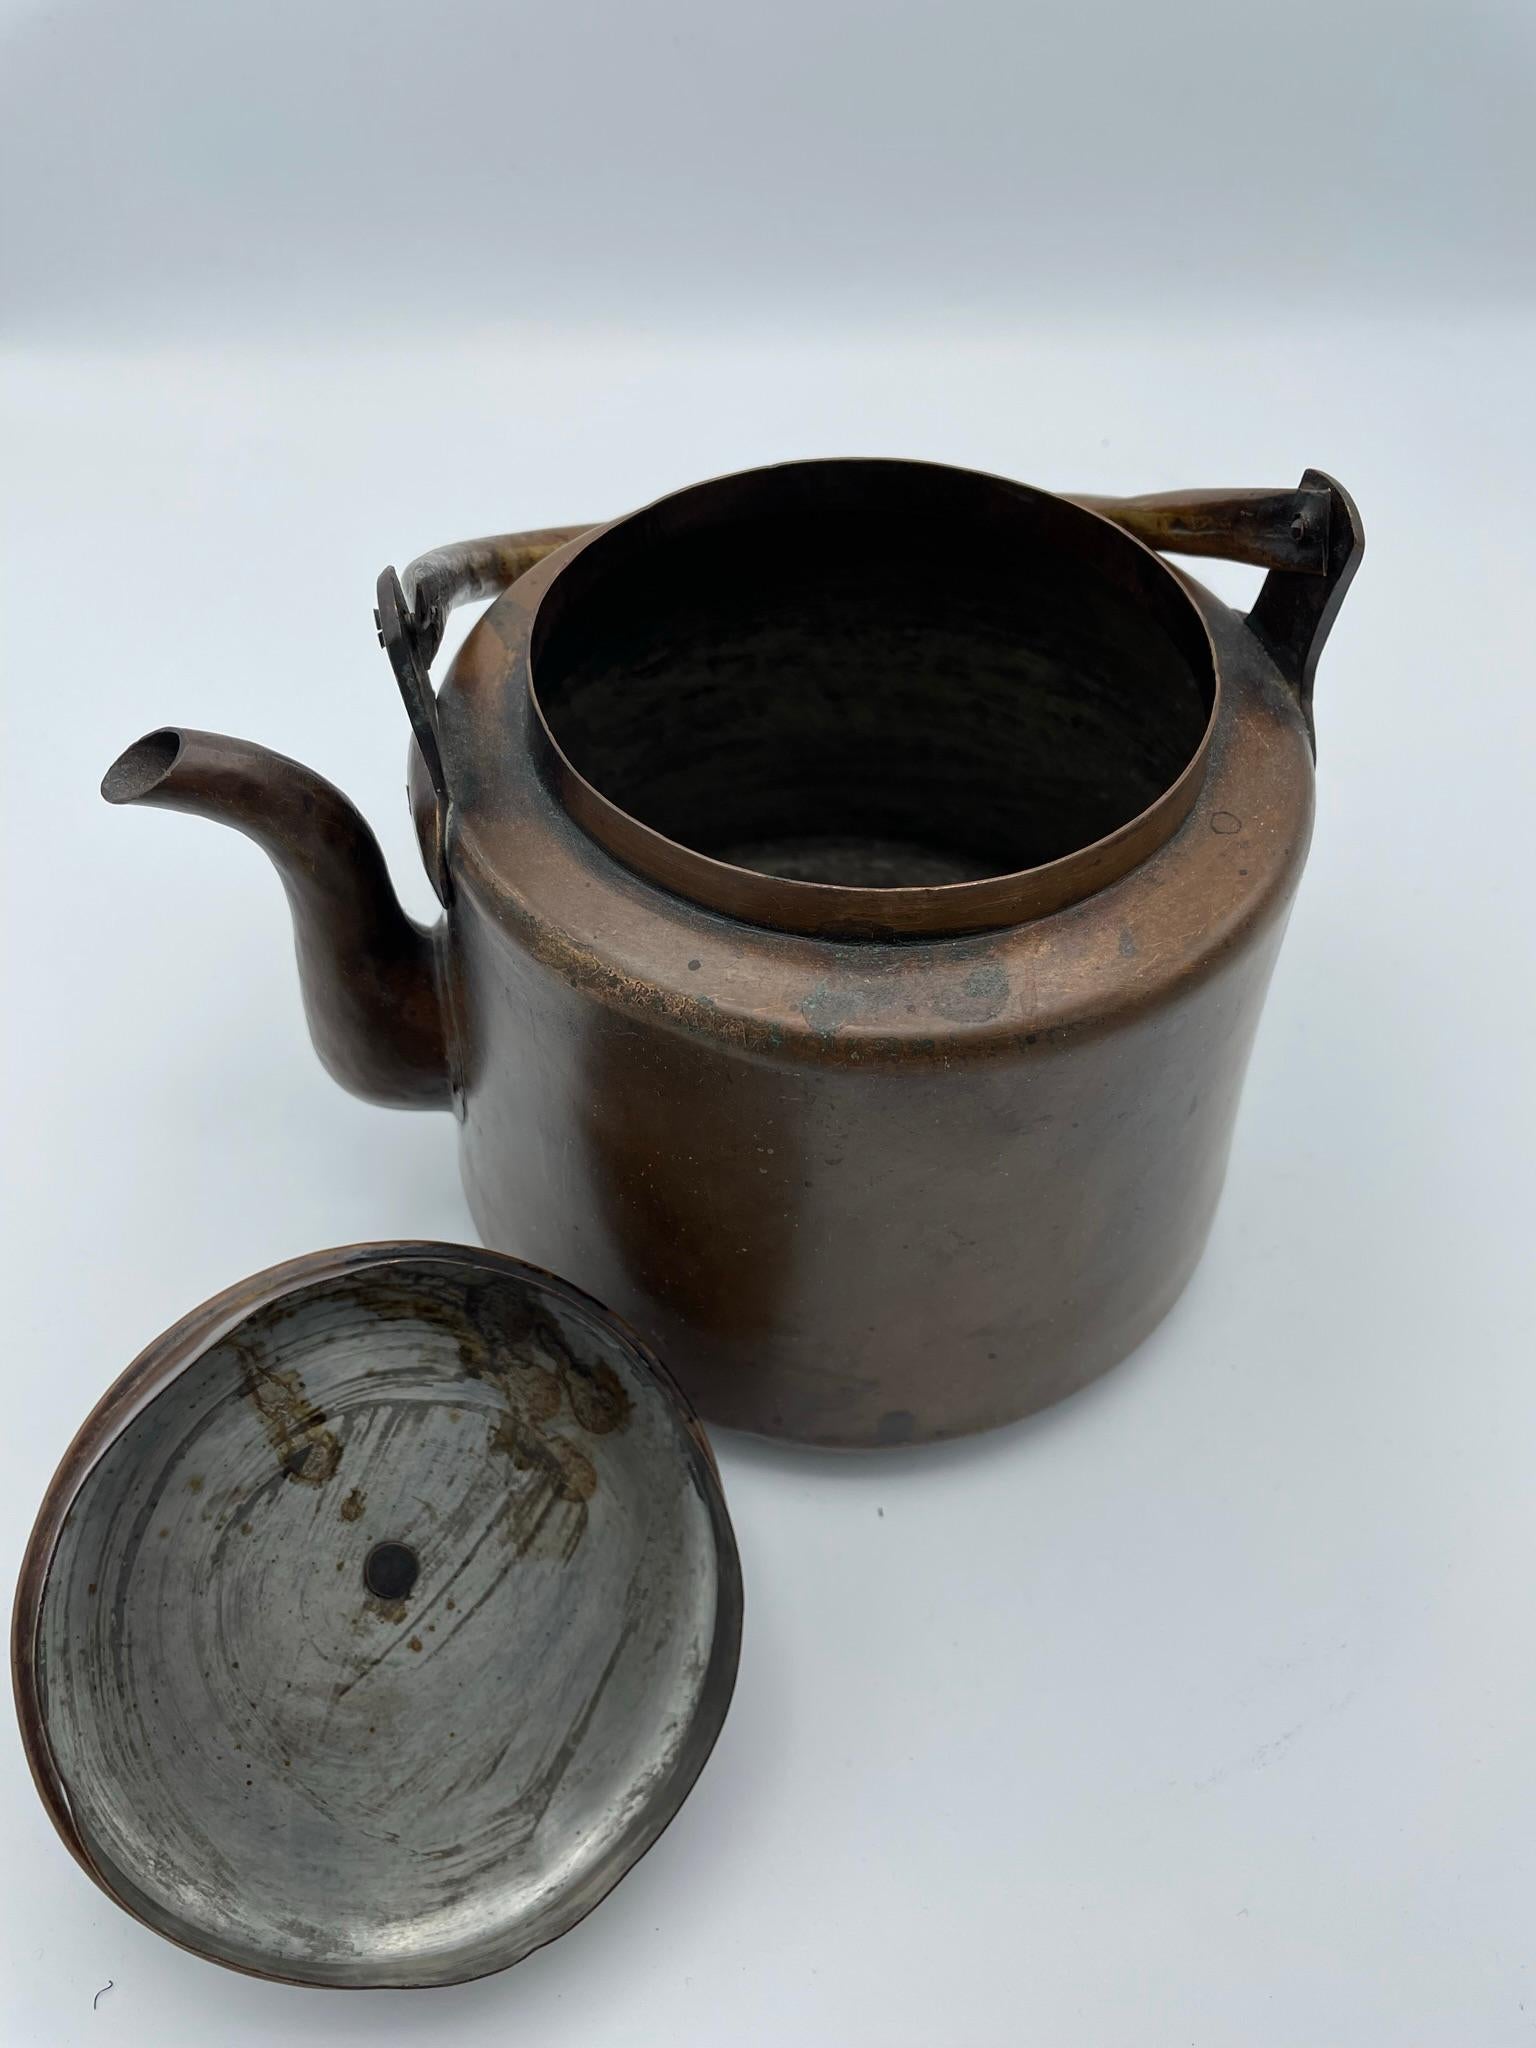 Antique Japanese Pitcher 'Yakan' with Copper 1920s for Tea Ceremony For Sale 5